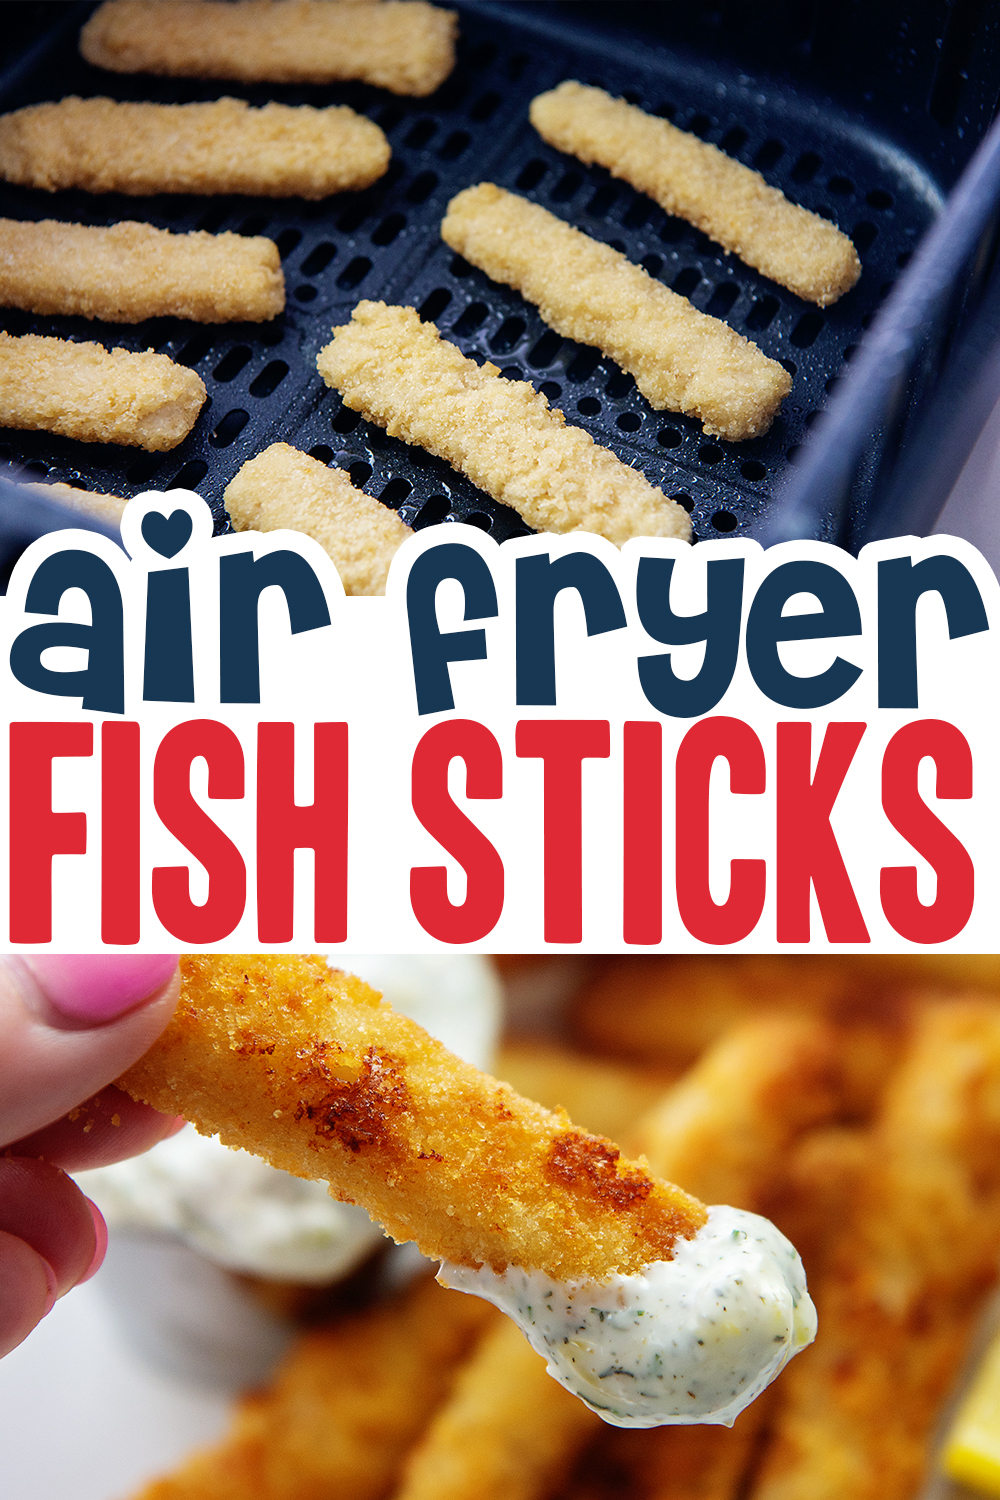 These air fryer fish sticks are good on their own, but they are amazing in a fish taco!